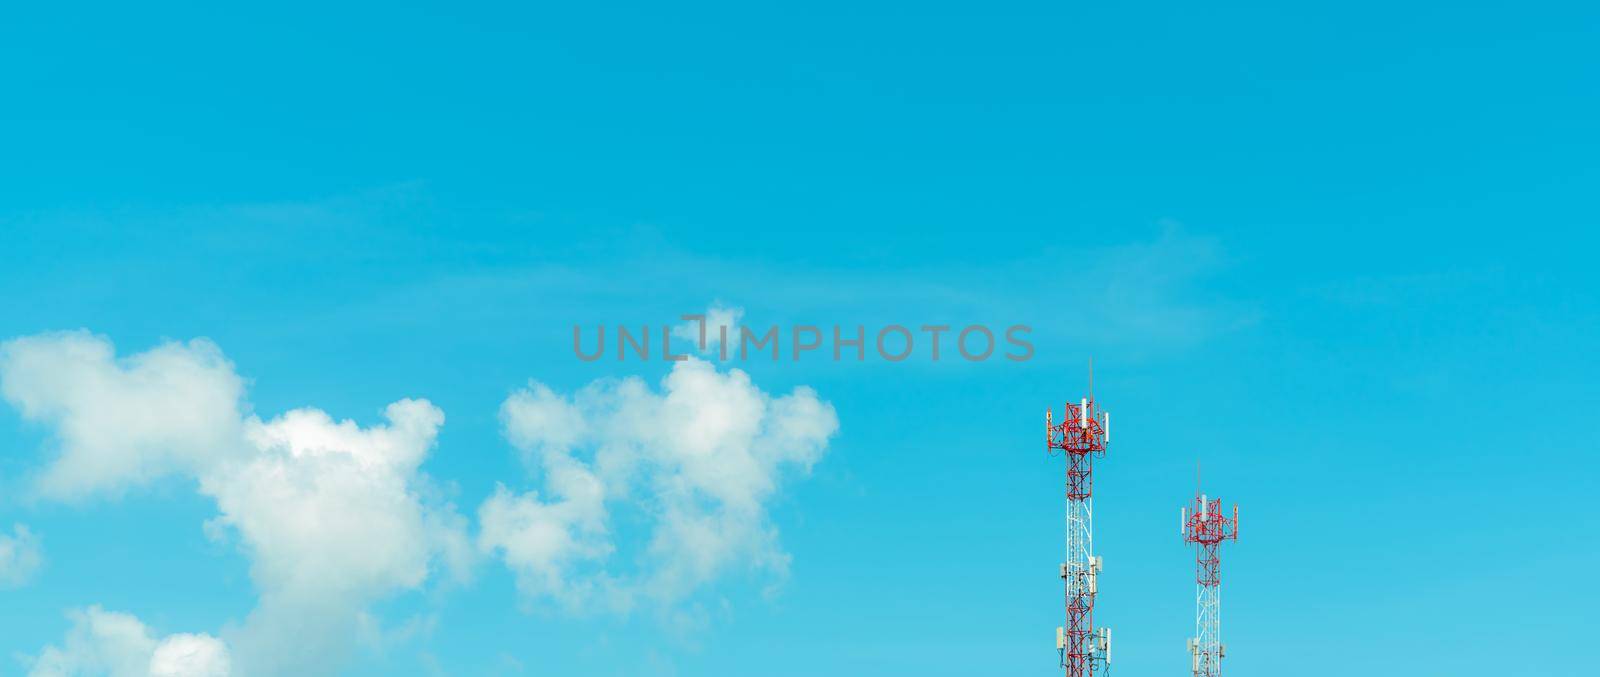 Telecommunication tower with blue sky and white clouds. Radio and satellite pole. Communication technology. Telecommunication industry. Mobile or telecom 4g and 5g network. Telecommunication pylon. by Fahroni